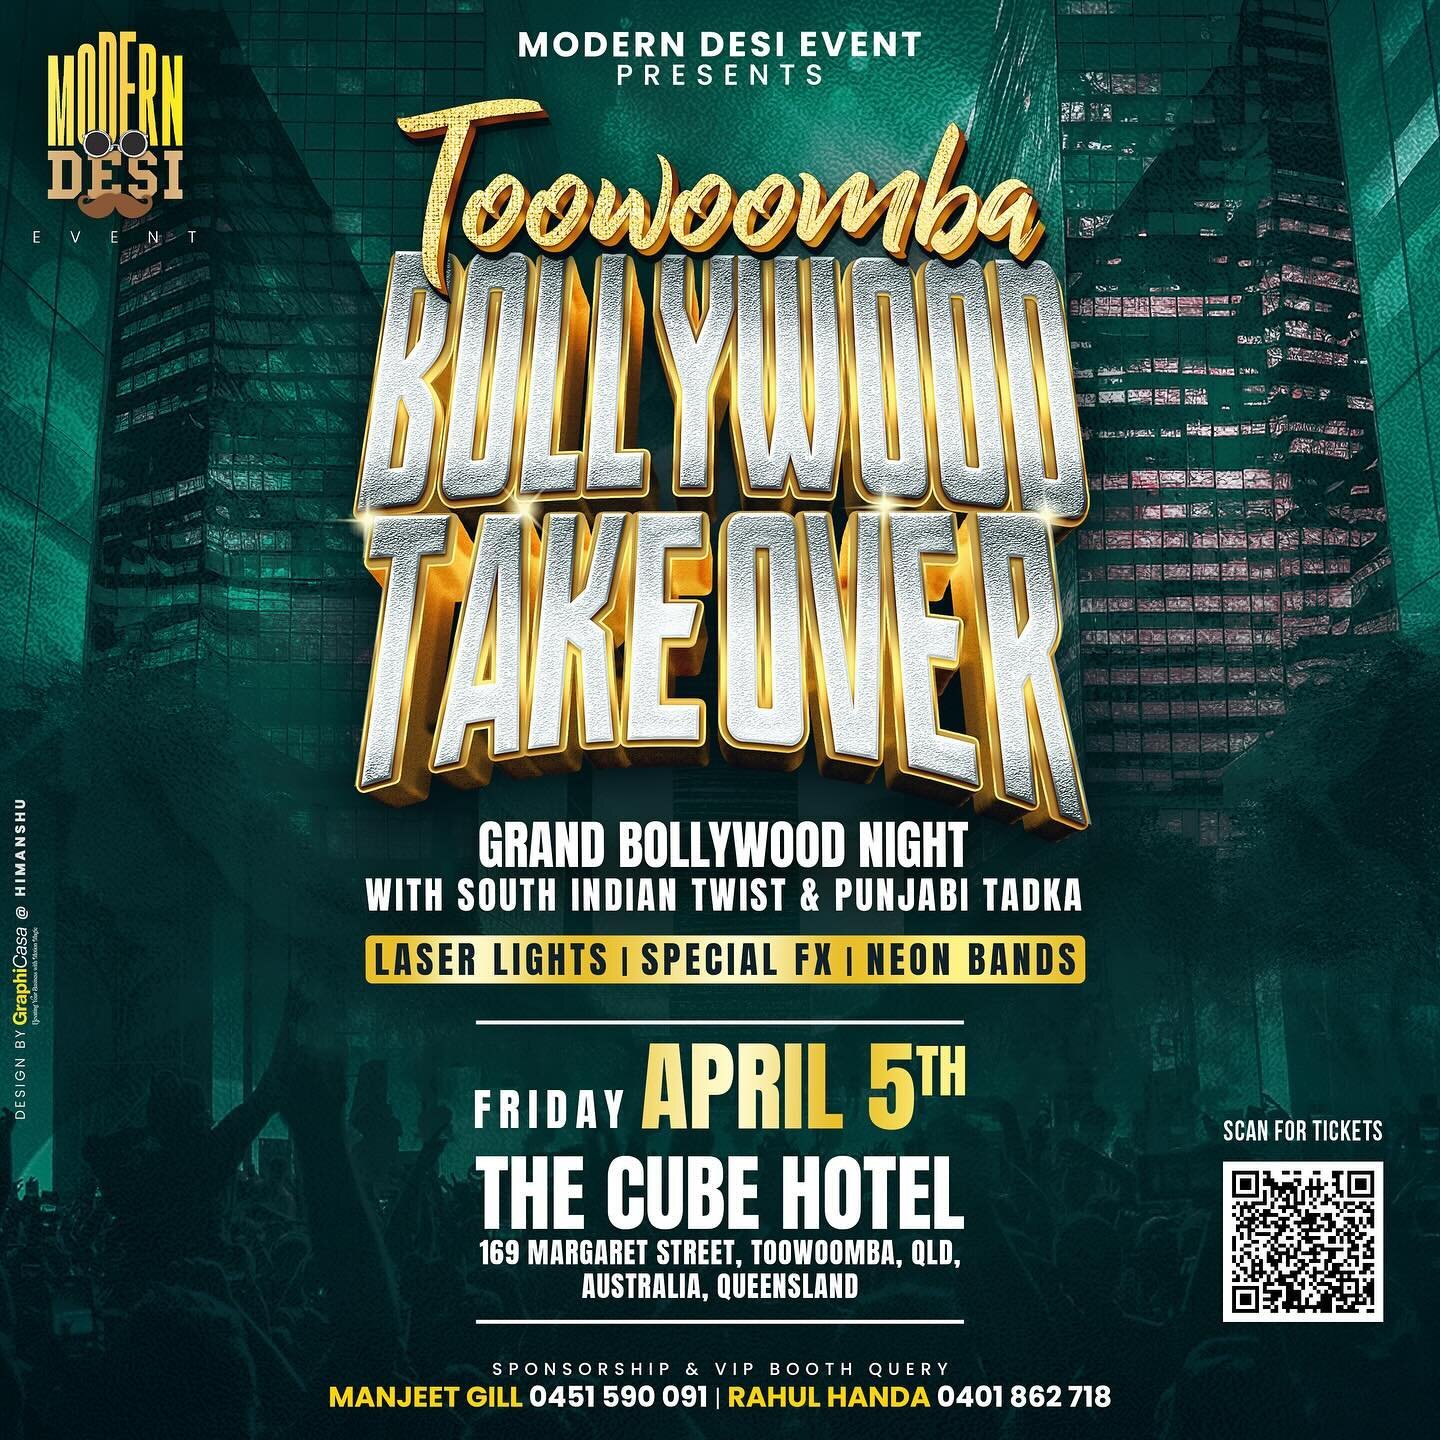 Modern Desi Presents a 

Toowoomba Bollywood Takeover!!

Three DJ&rsquo;s, three styles Southern Indian, Nepalese and Bollywood

Come join the fun scan QR code for tickets

#cubehotel #takeover #moderndesi #toowoomba #bollywood #nepal #southindian